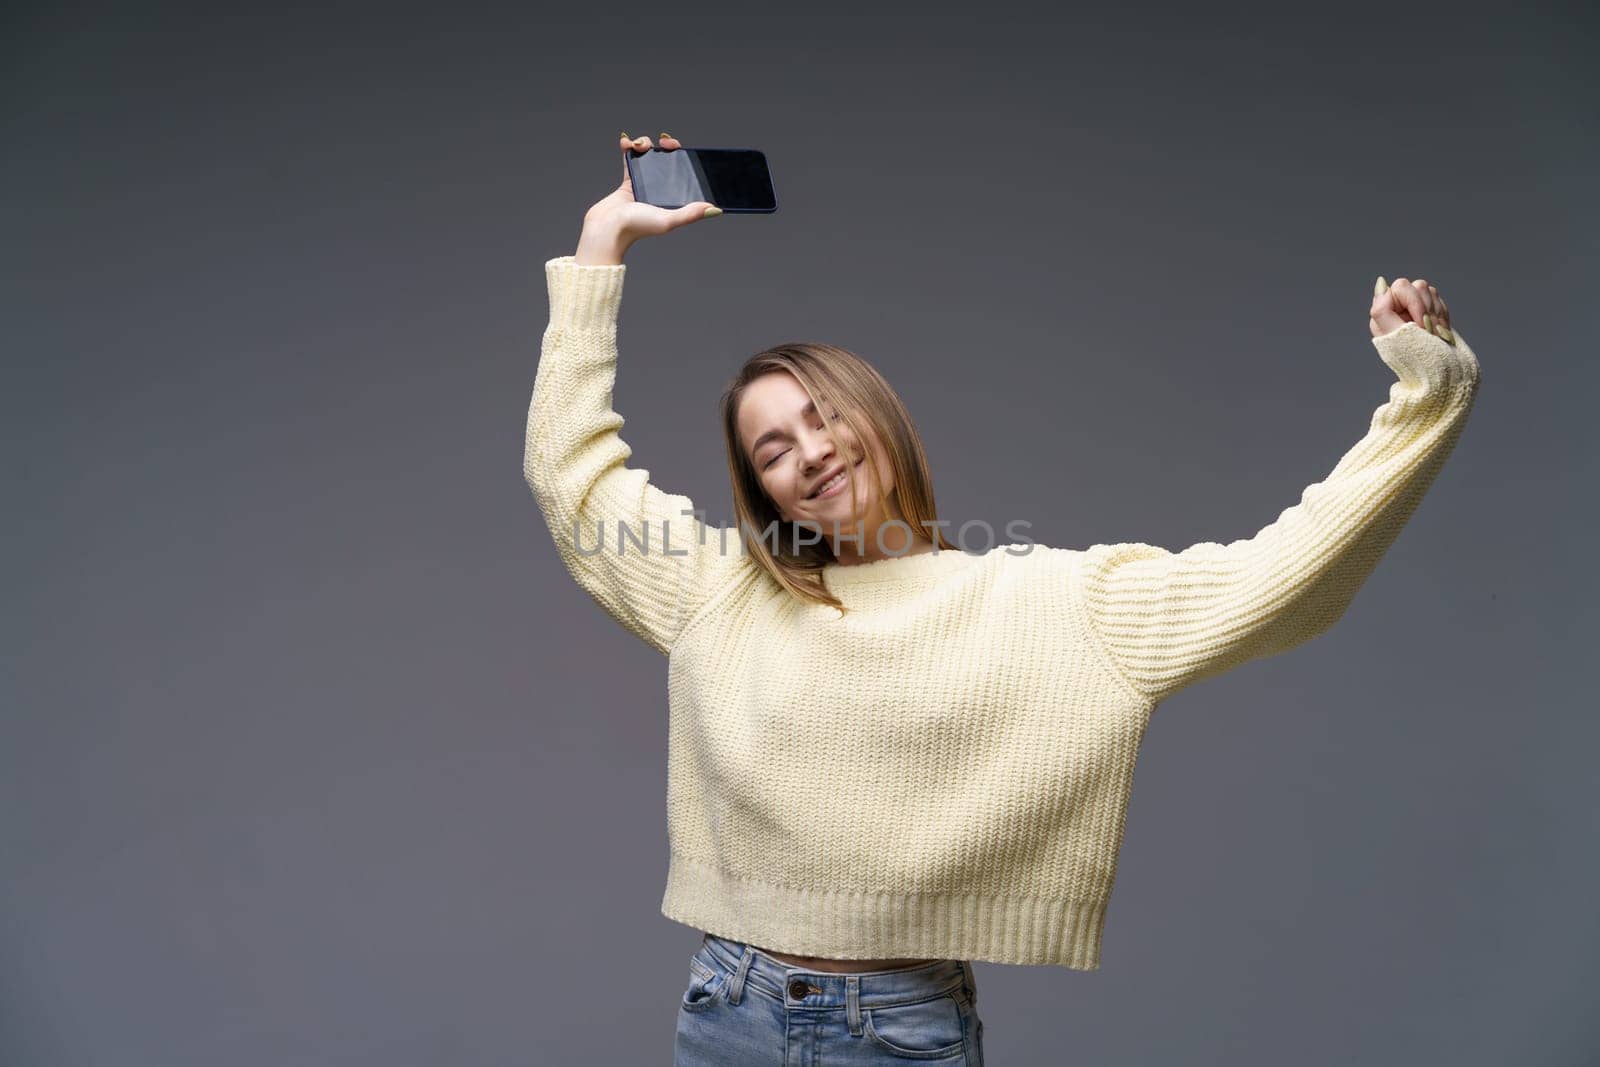 Young cheerful woman of Caucasian ethnicity in a yellow sweater on a gray background is dancing with a phone in her hand. Happy girl listening to music on the phone dancing raising her hands up